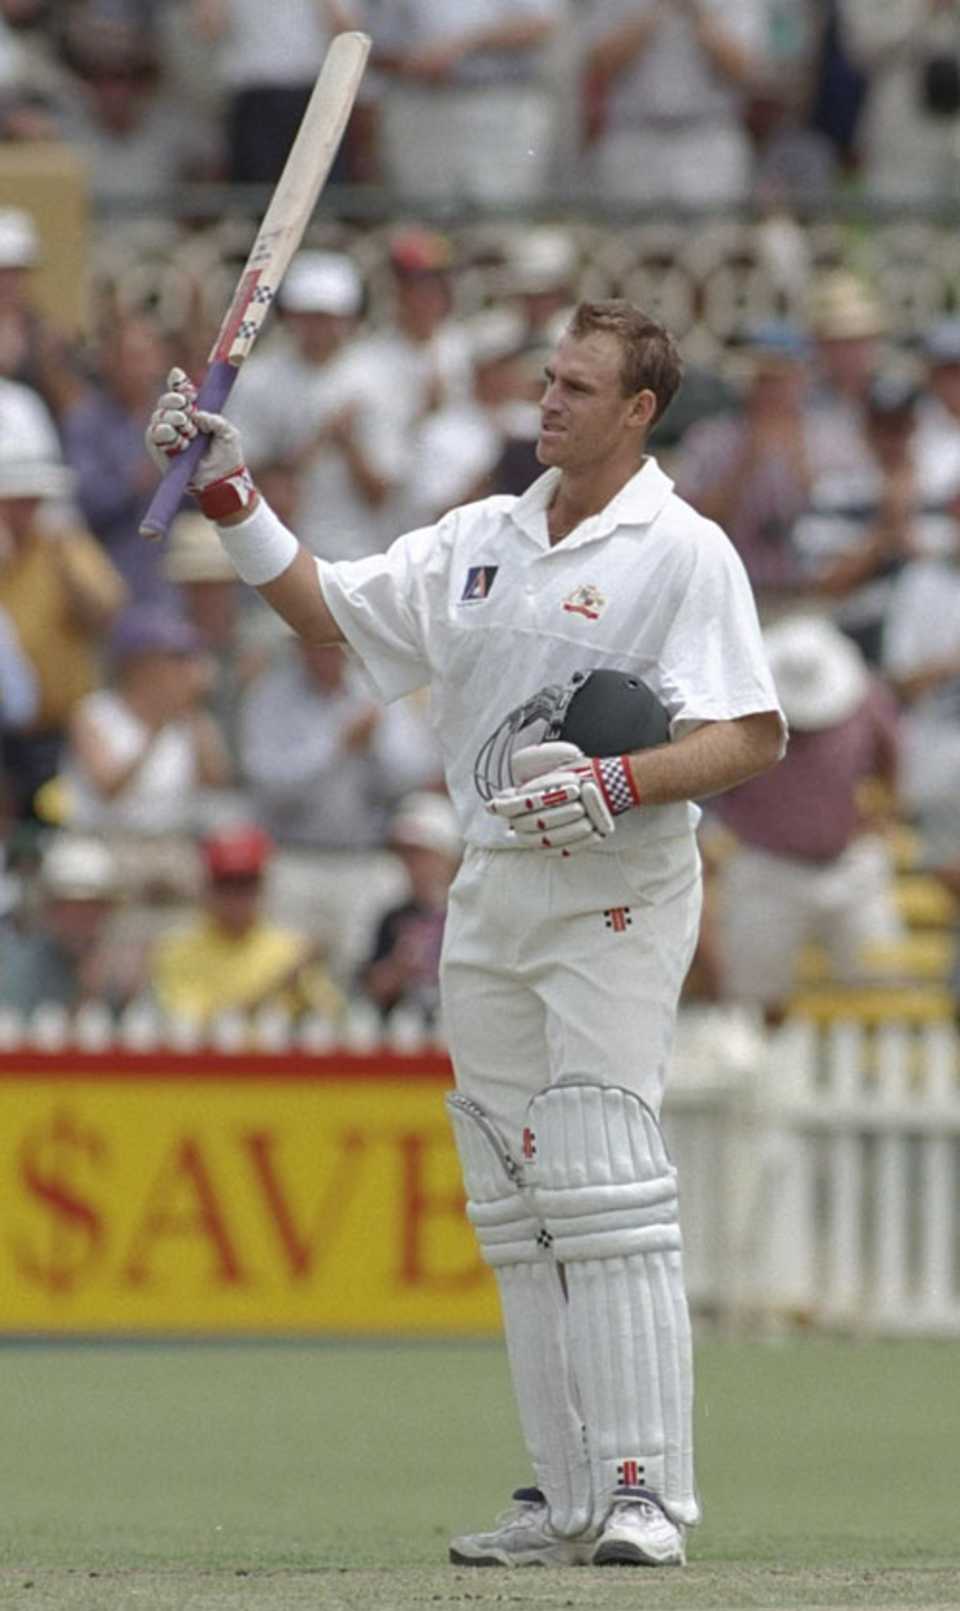 Matthew Hayden acknowledges the applause after reaching his first Test century